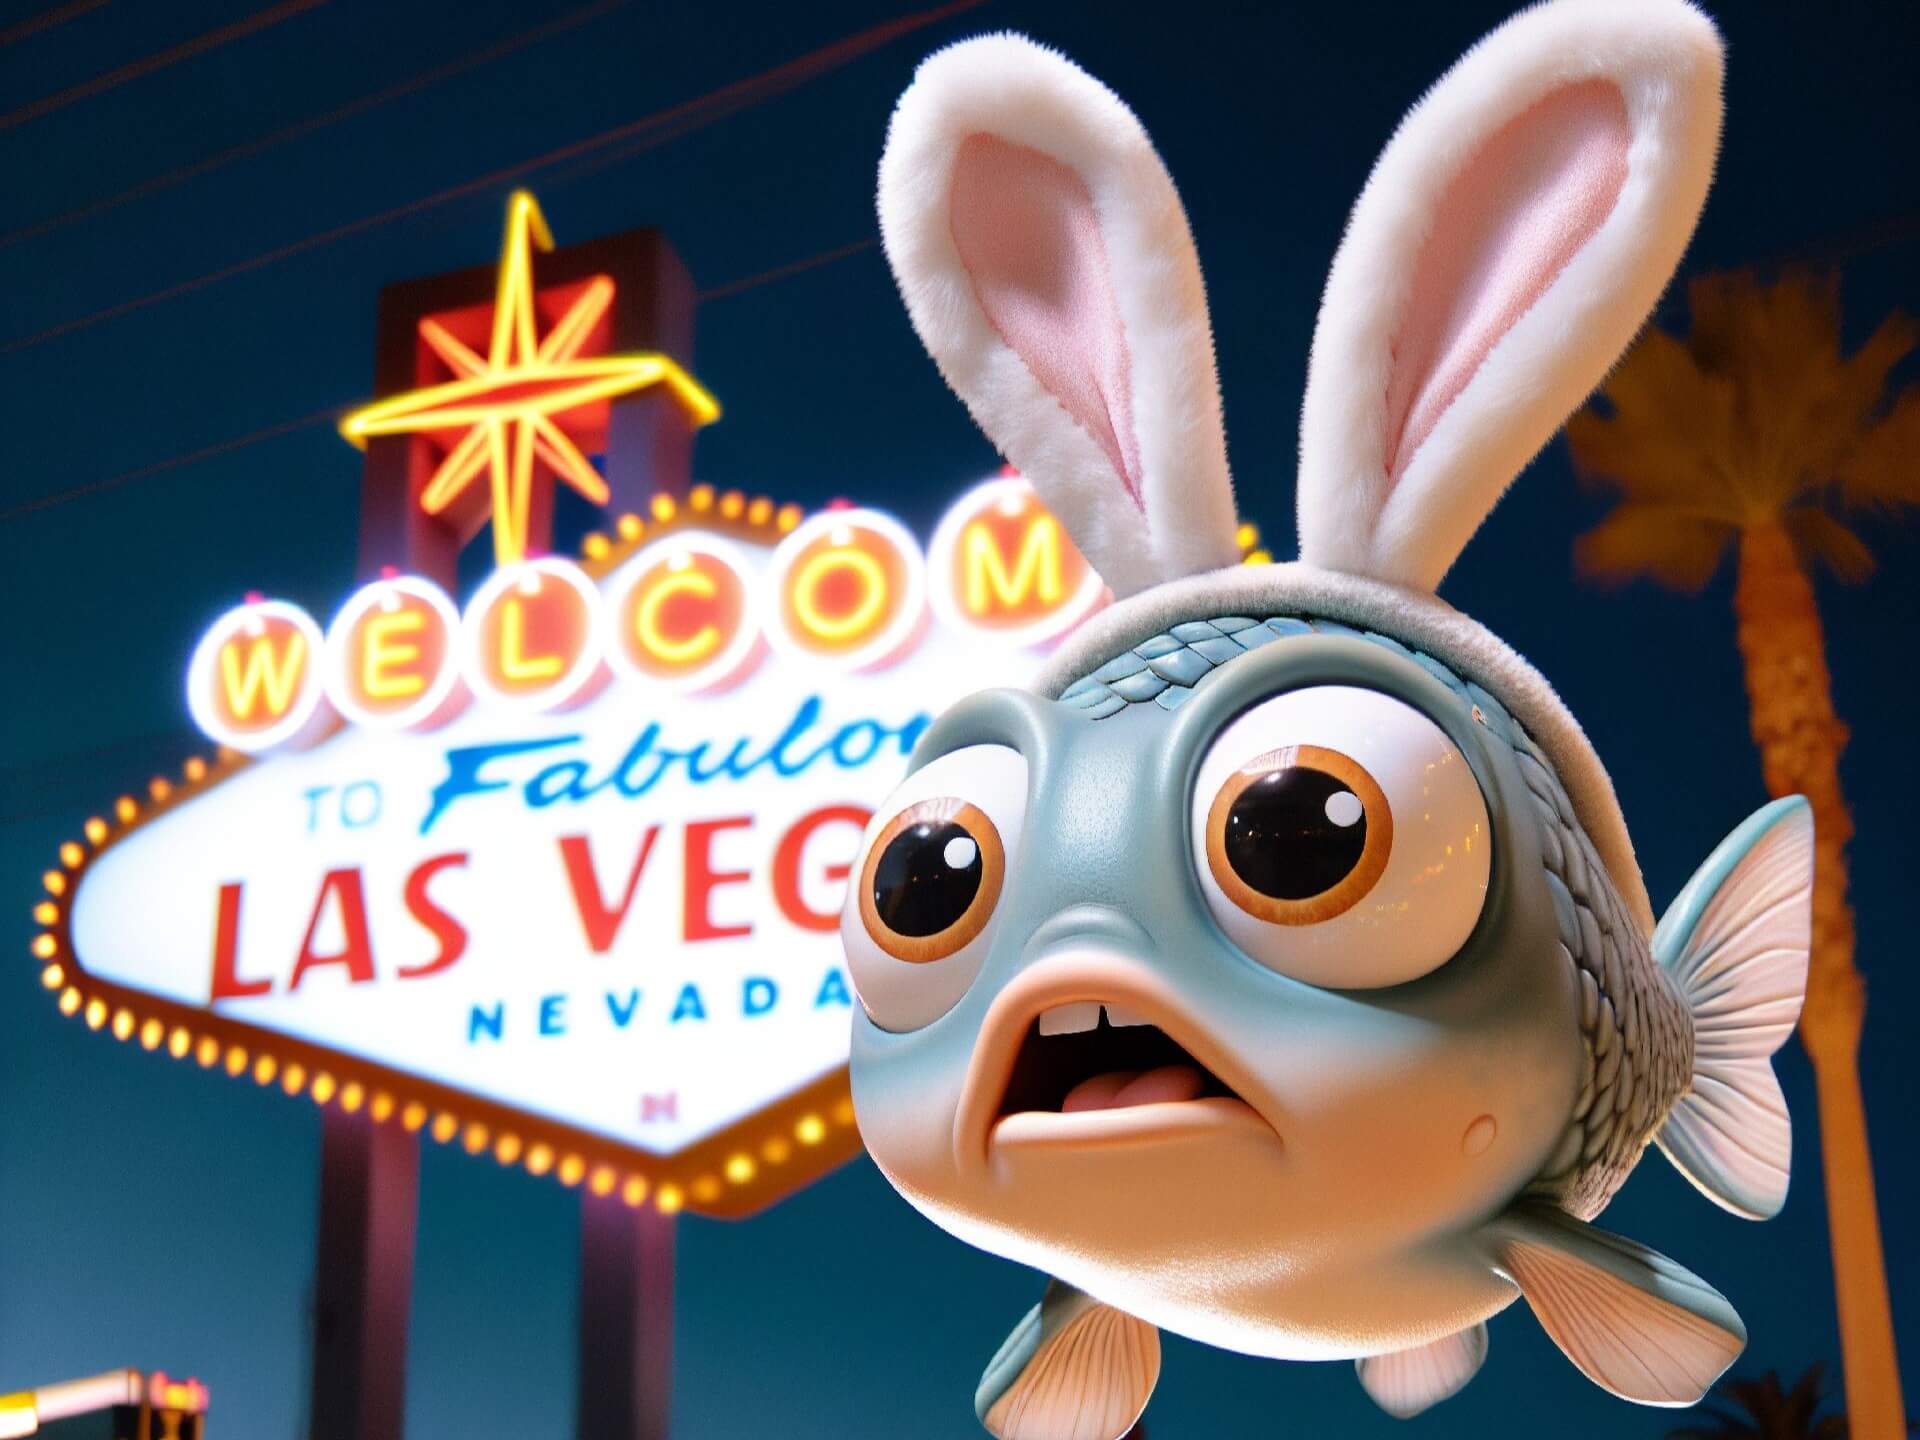 A cartoon fish wearing bunny ears, hovering near the world-famous "Welcome to Las Vegas" sign